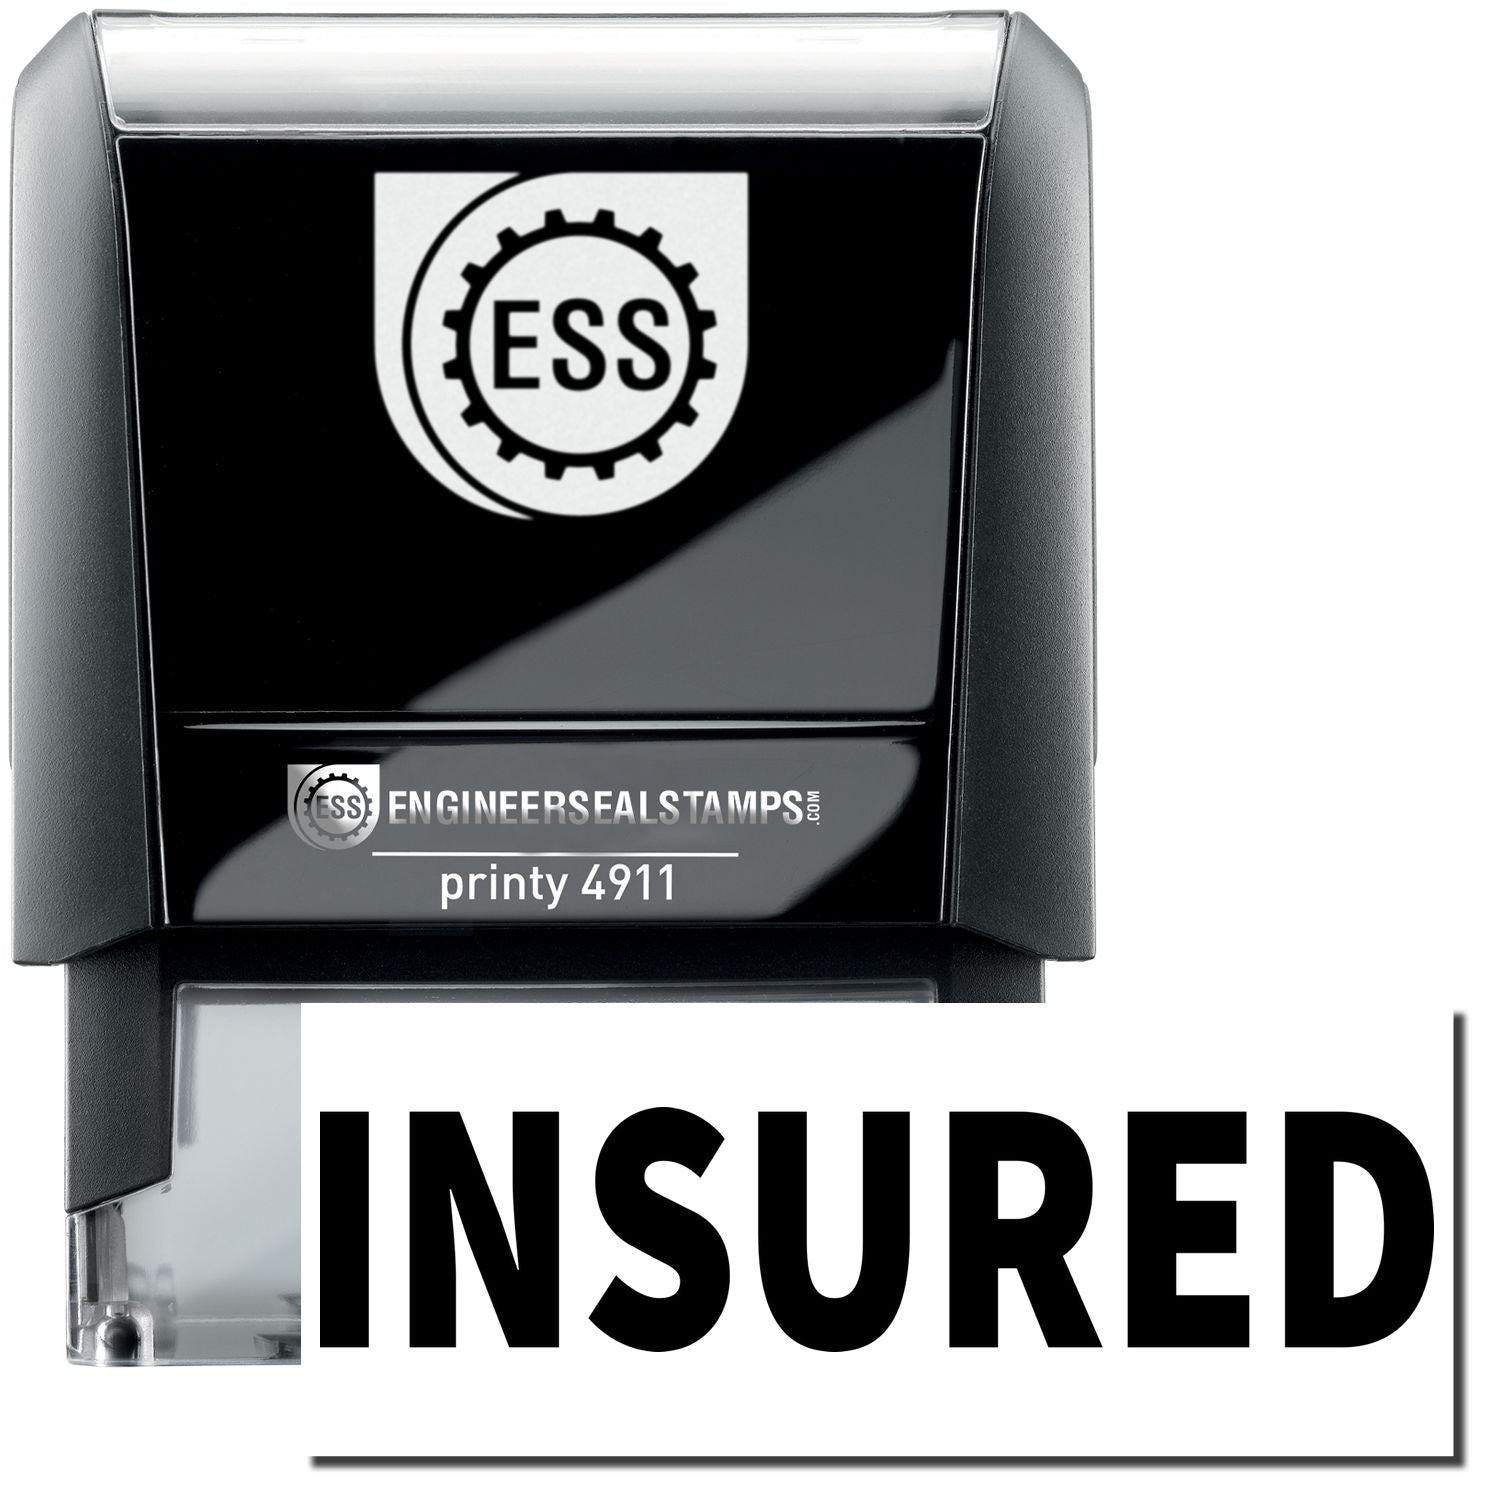 A self-inking stamp with a stamped image showing how the text "INSURED" is displayed after stamping.